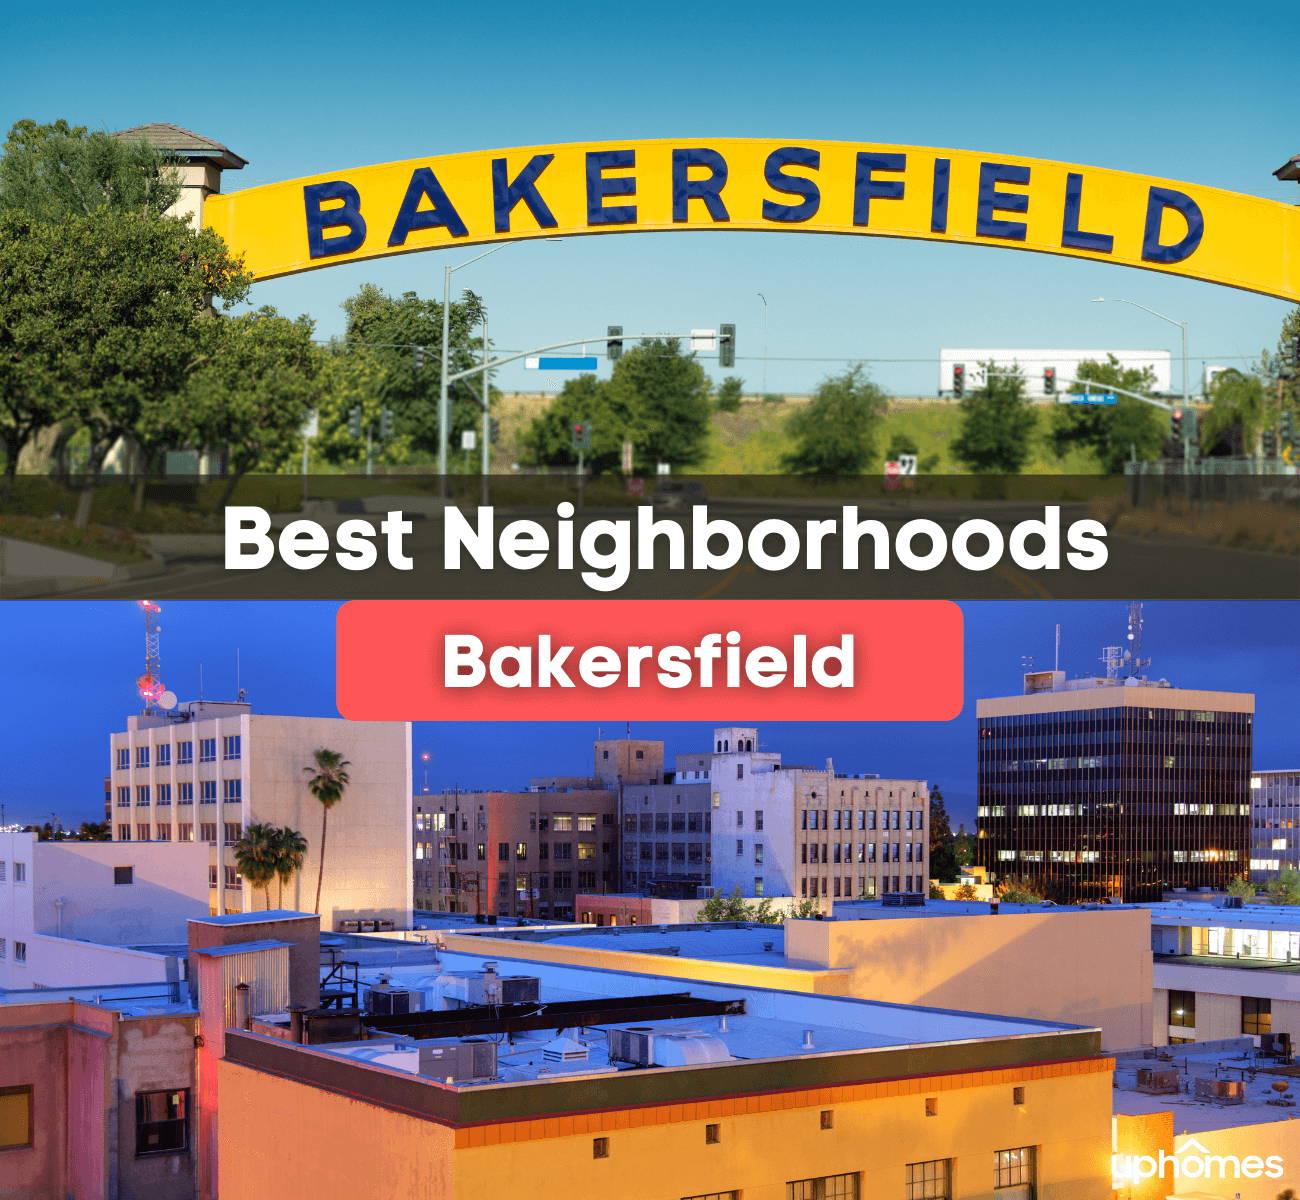 Best neighborhoods in Bakersfield, CA - What are the best places to live in Bakersfield, California?